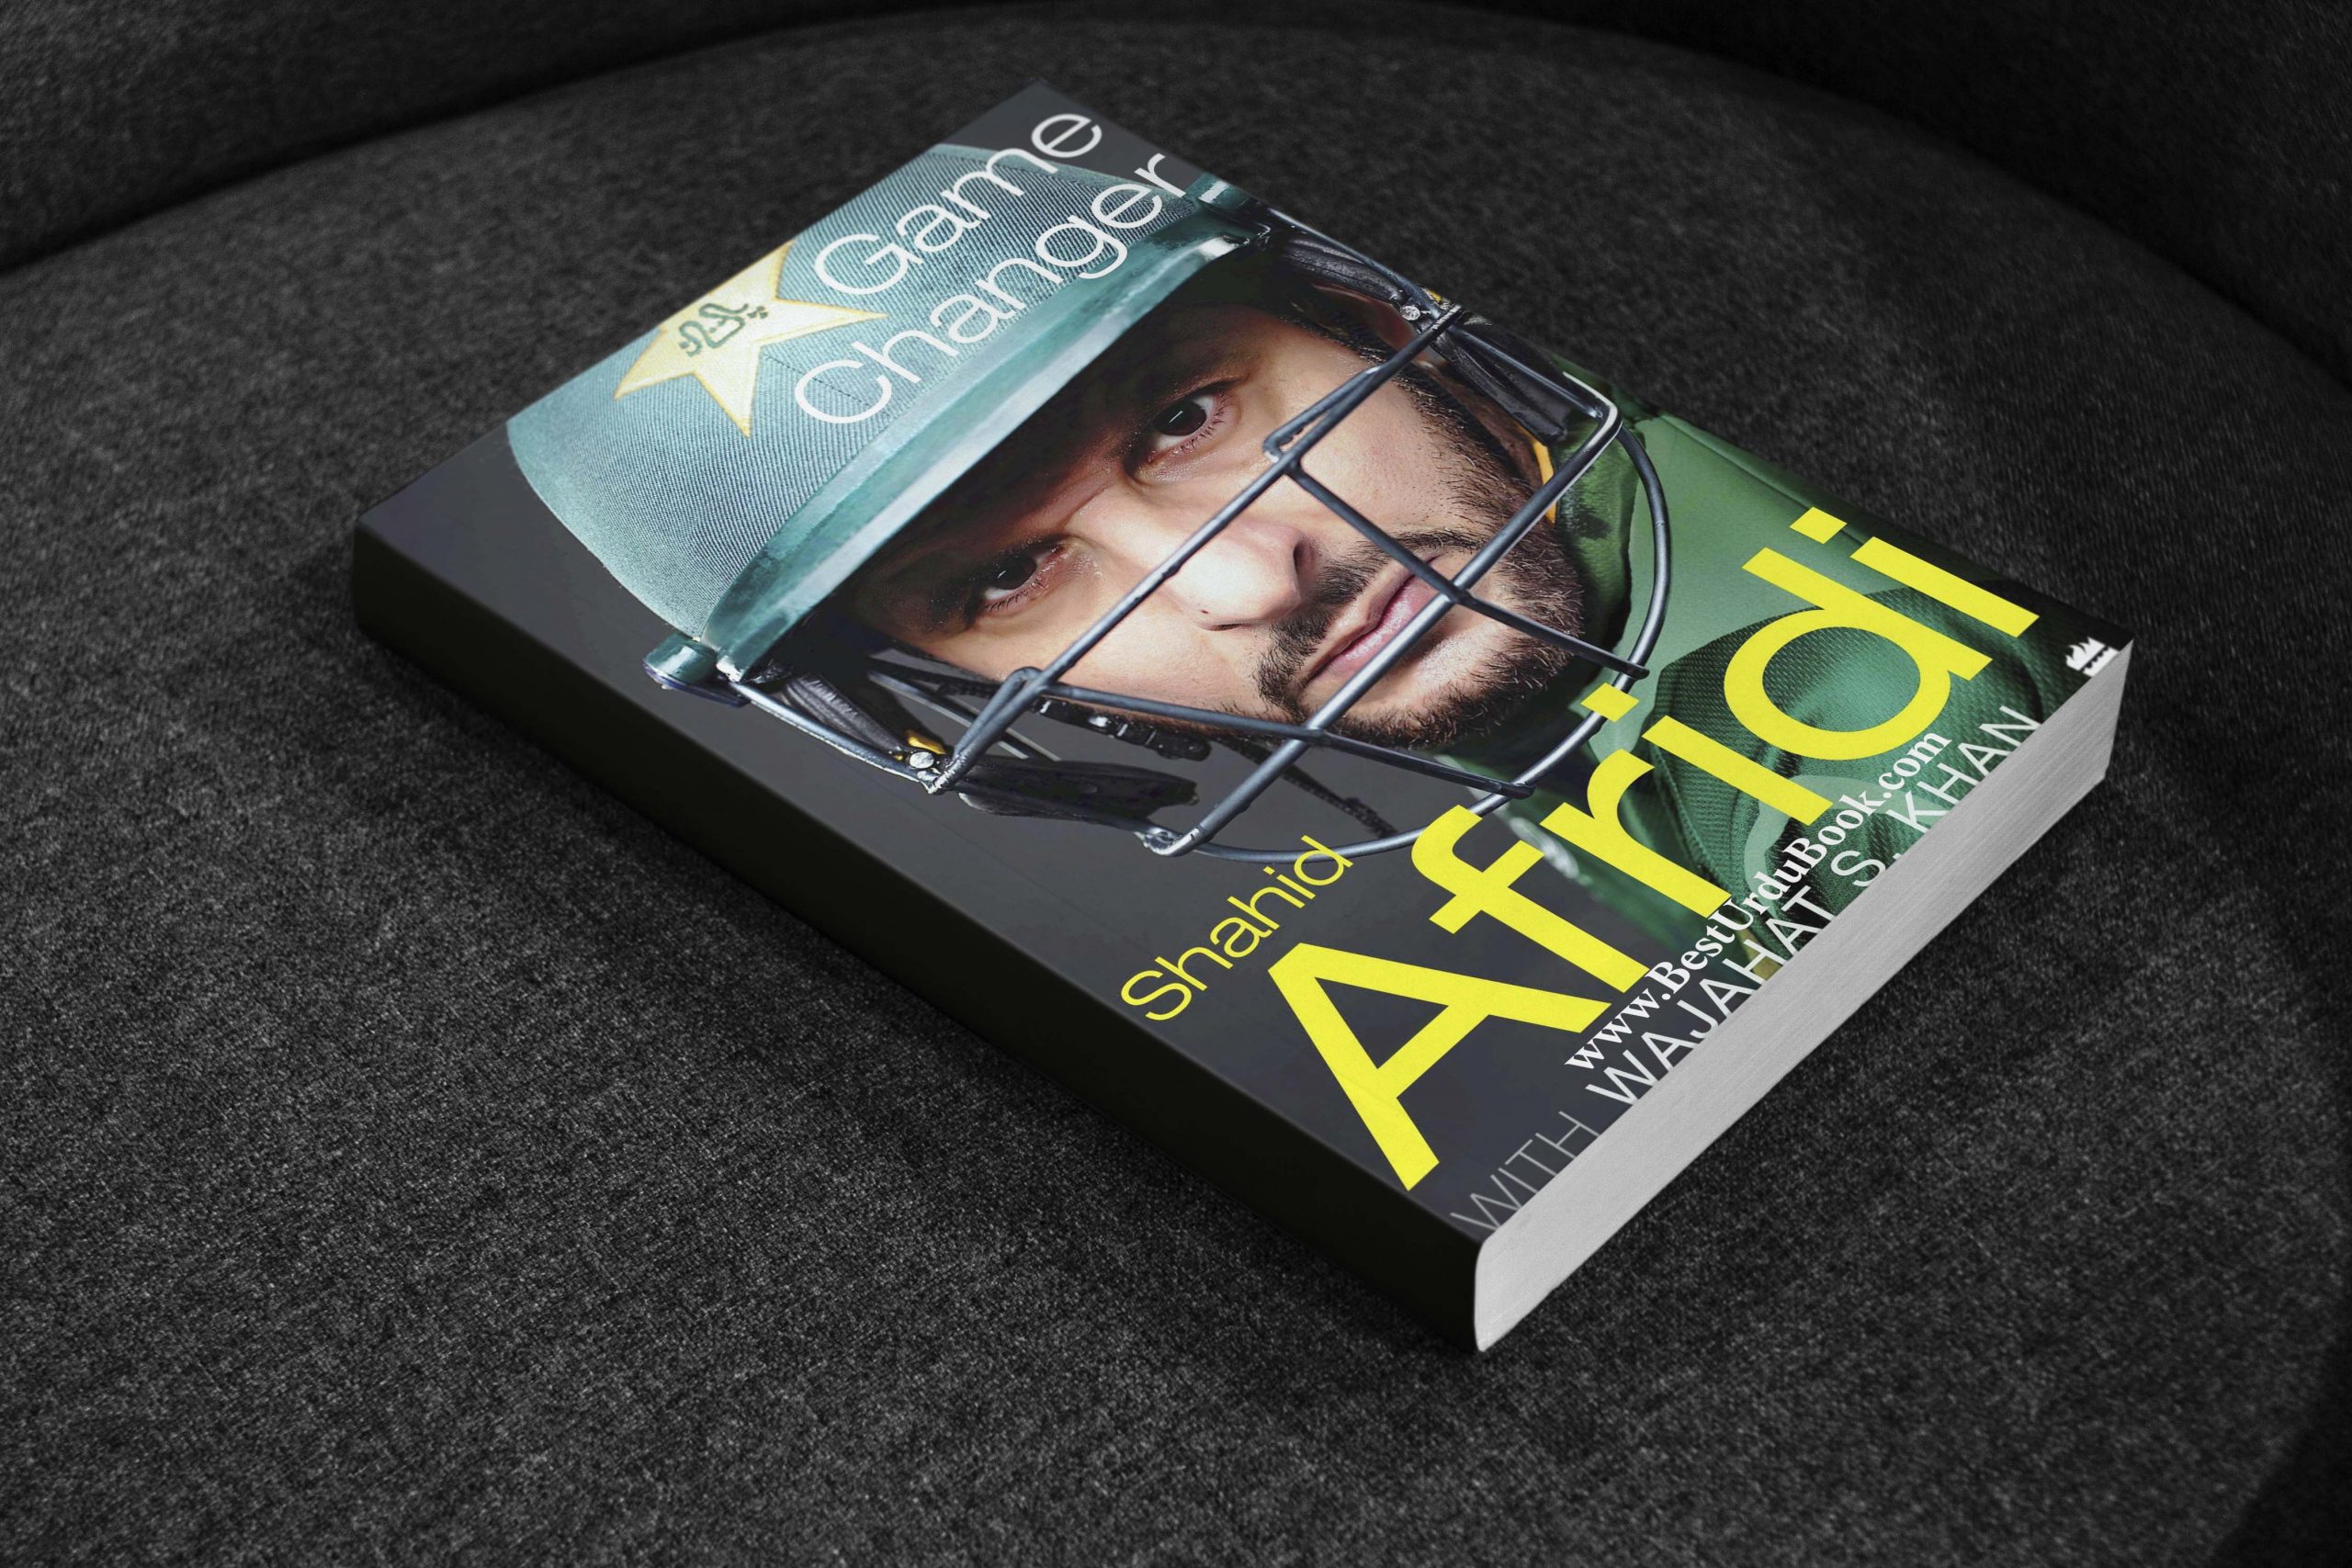 Game Changer Book Shahid Afridi Book